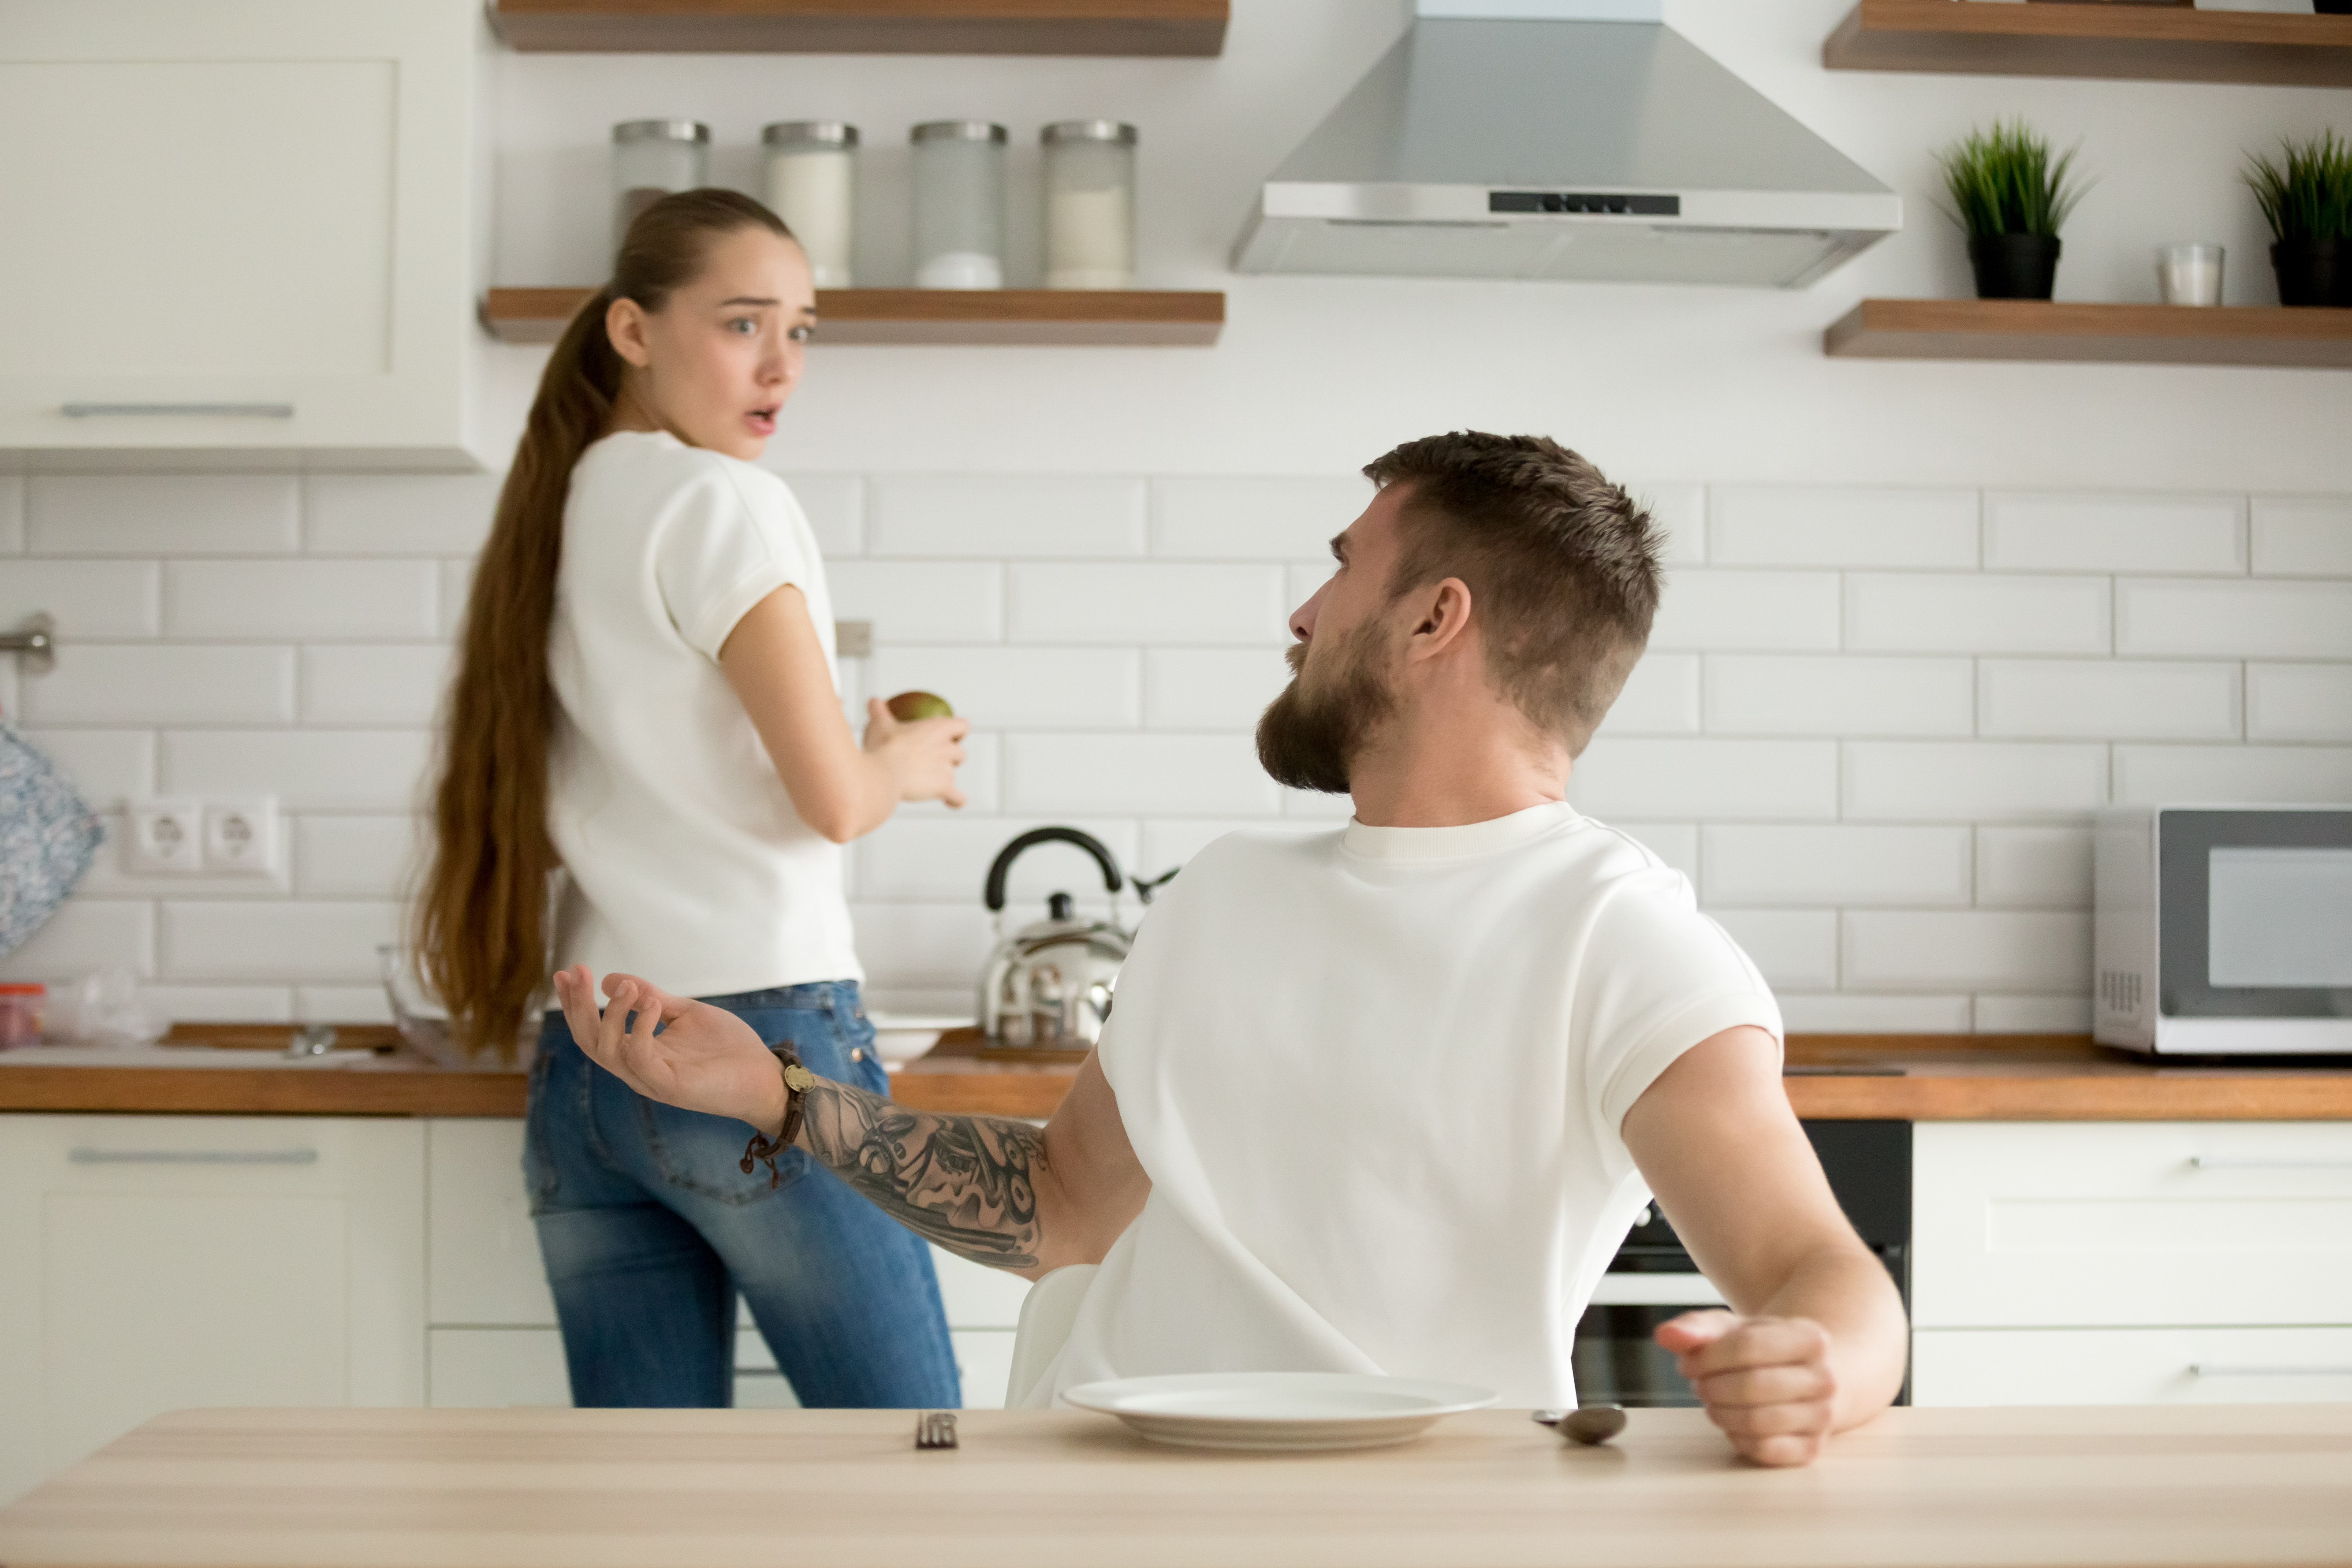 man argues to a woman  | Shutterstock